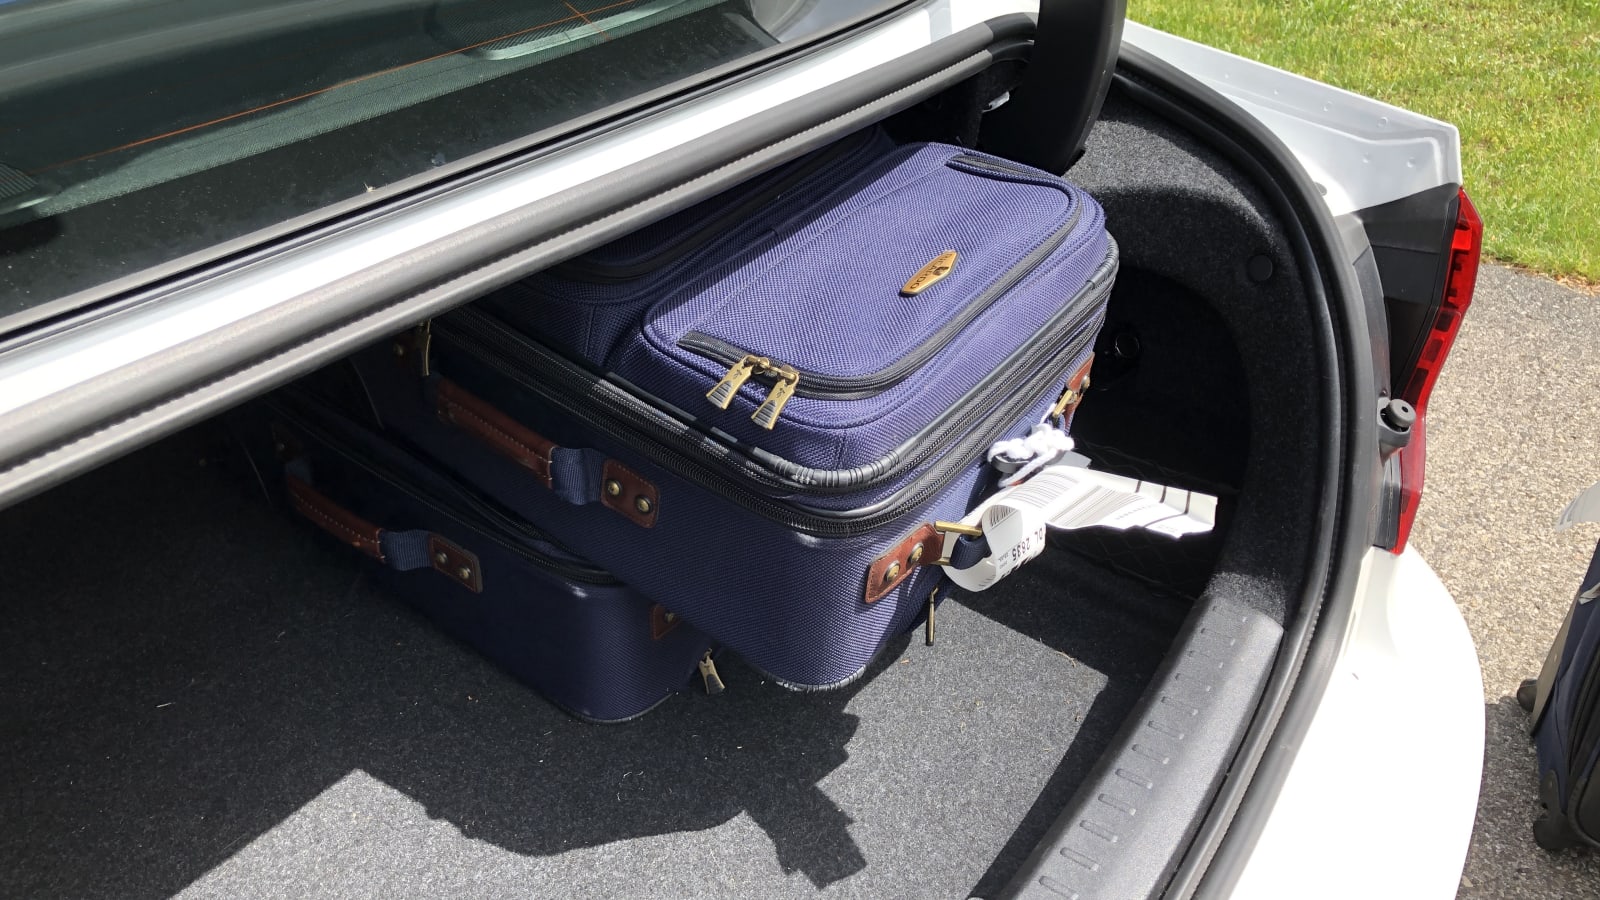 2020 Volvo S60 T8 Luggage Test | Long-term utility update 10 Rice Tire